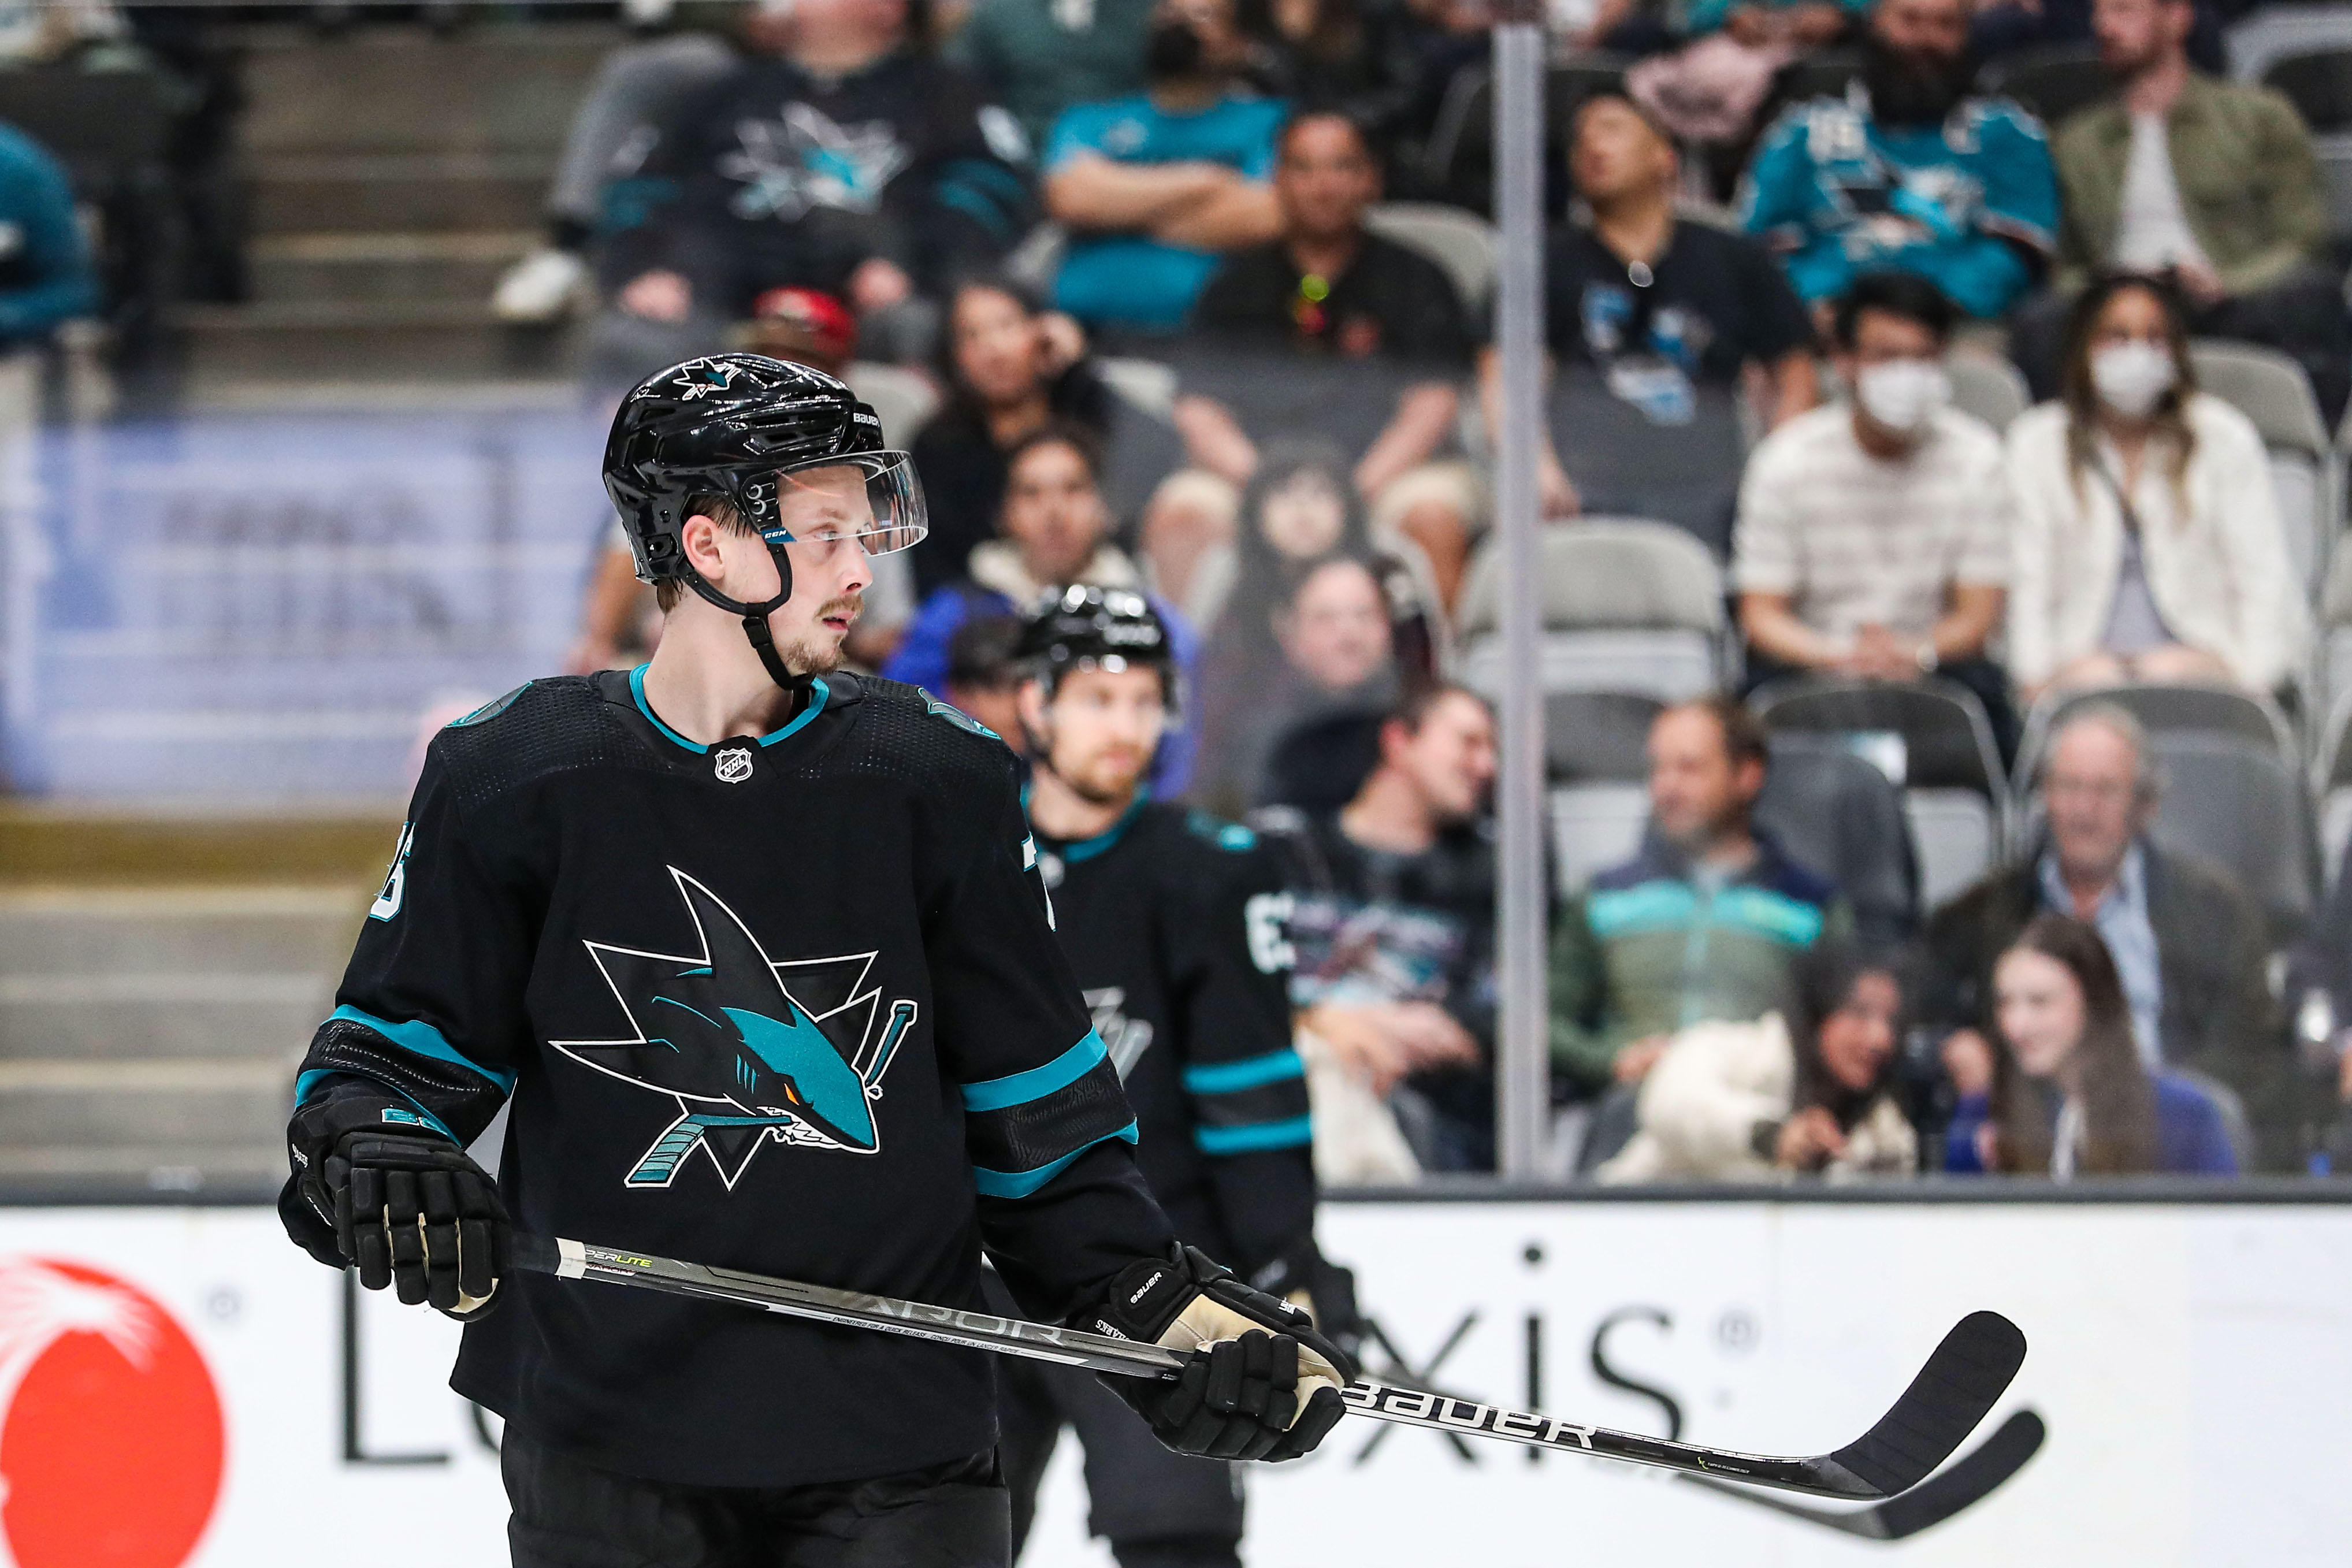 Jonathan Dahlen #76 of the San Jose Sharks stares down the ice during game against the Calgary Flames at SAP Center on April 7, 2022 in San Jose, California.